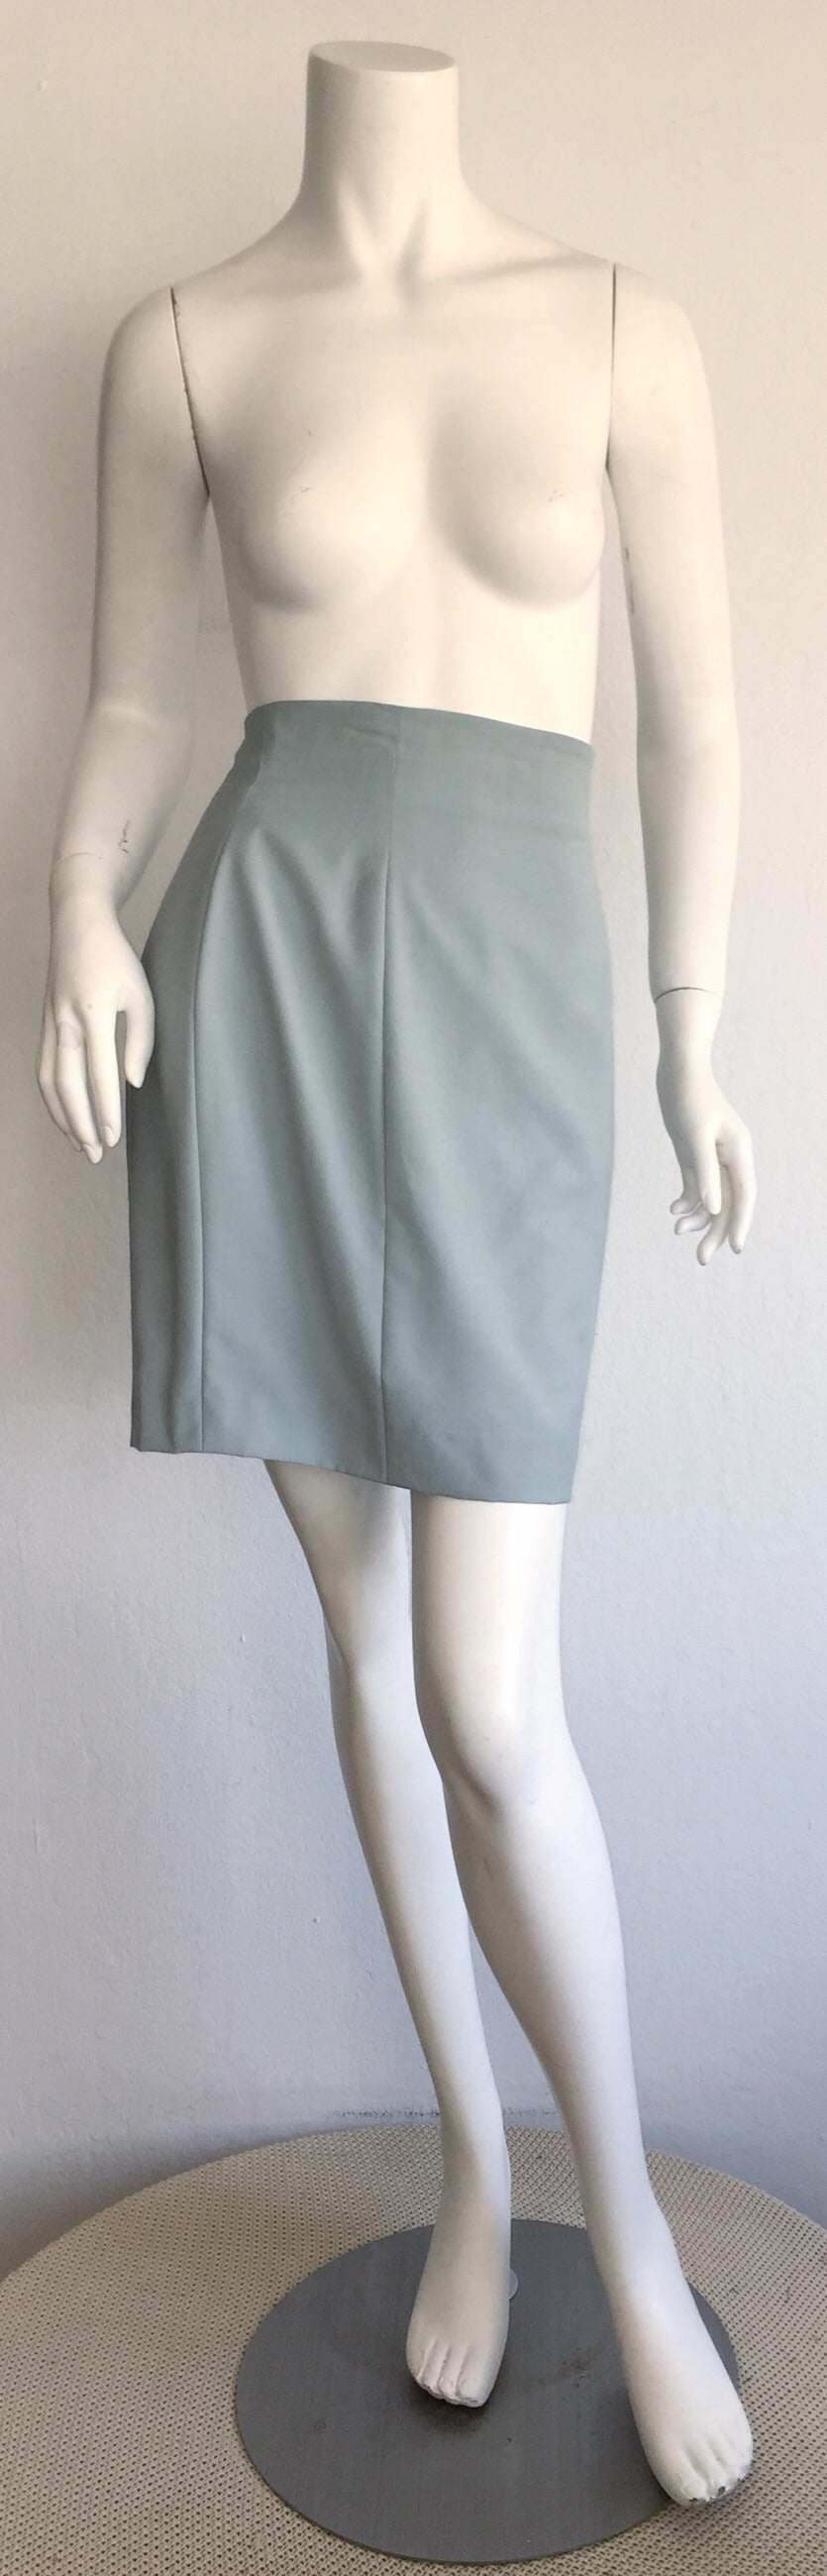 Women's Incredible Vintage Moschino Cheap & Chic Light Blue Iconic ' Hearts ' Skirt Suit